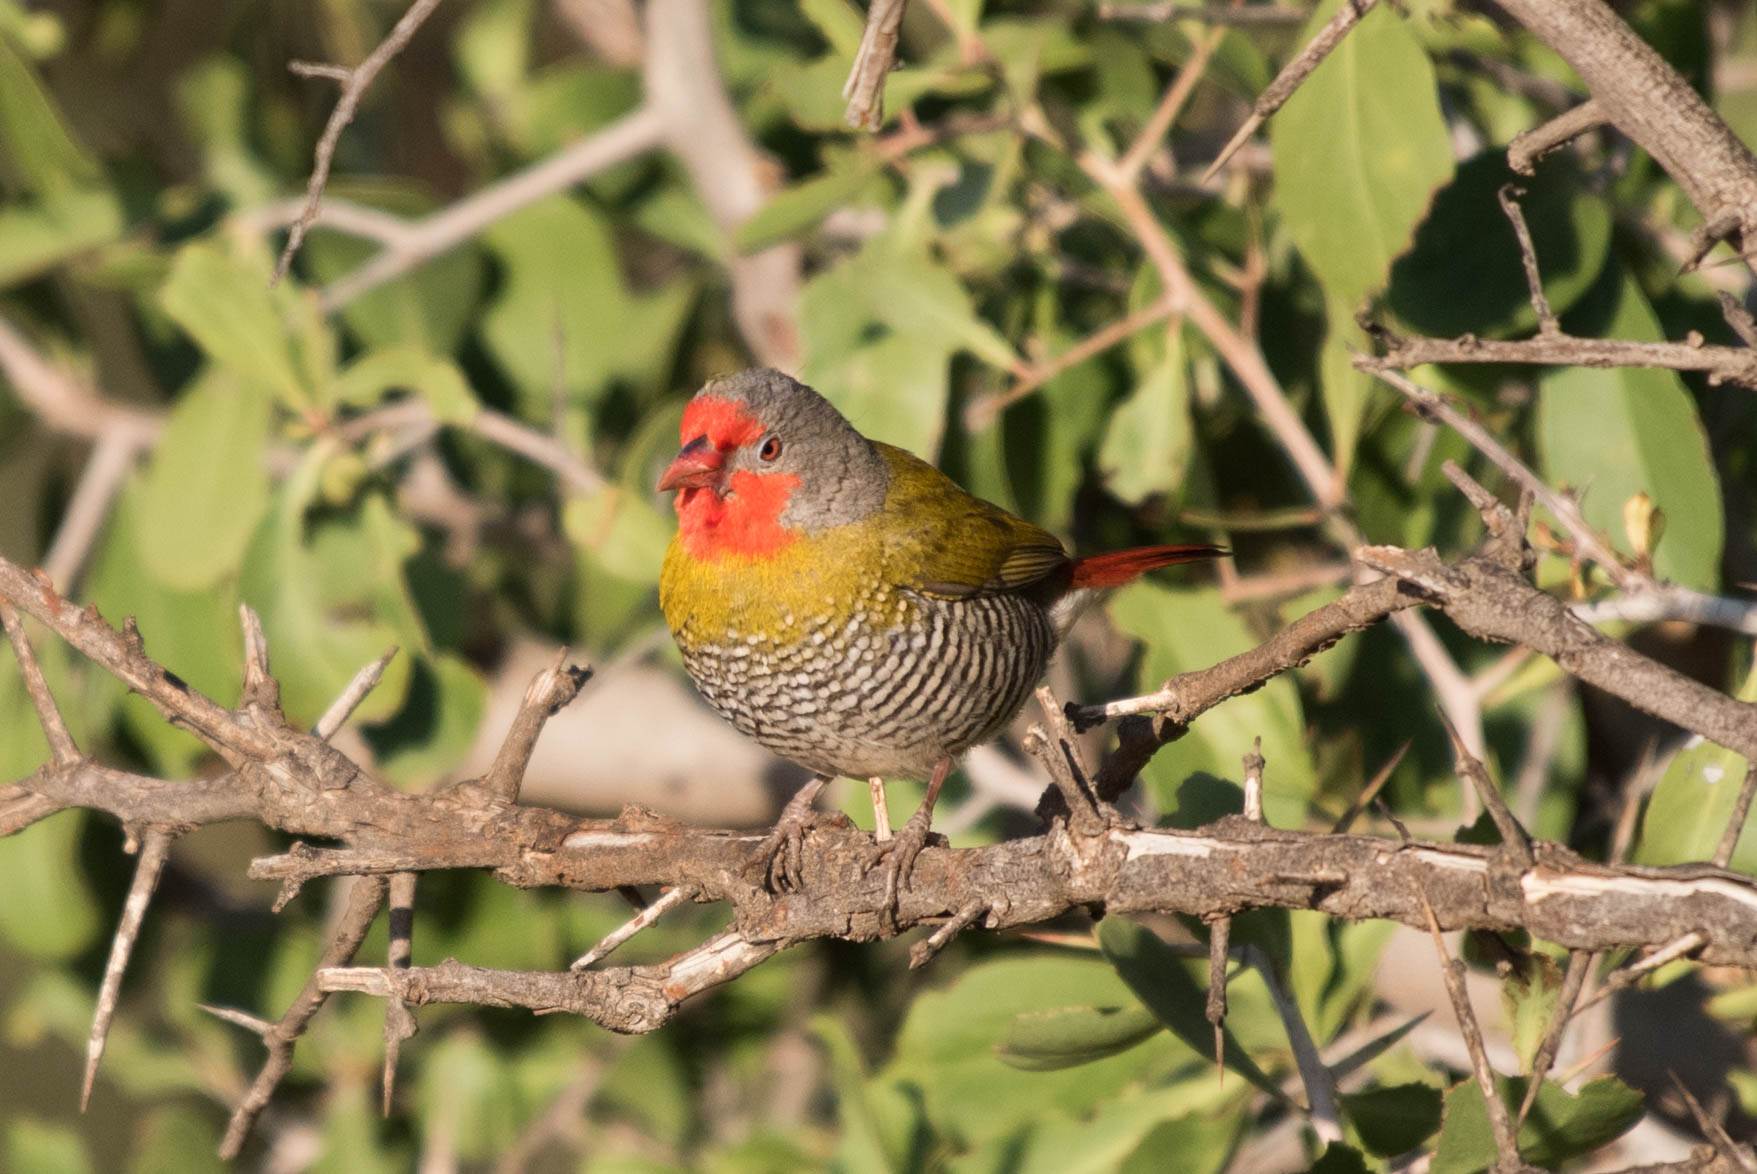 Melba finch (Green winged pytilia), Madikwe Game Reserve, South Africa